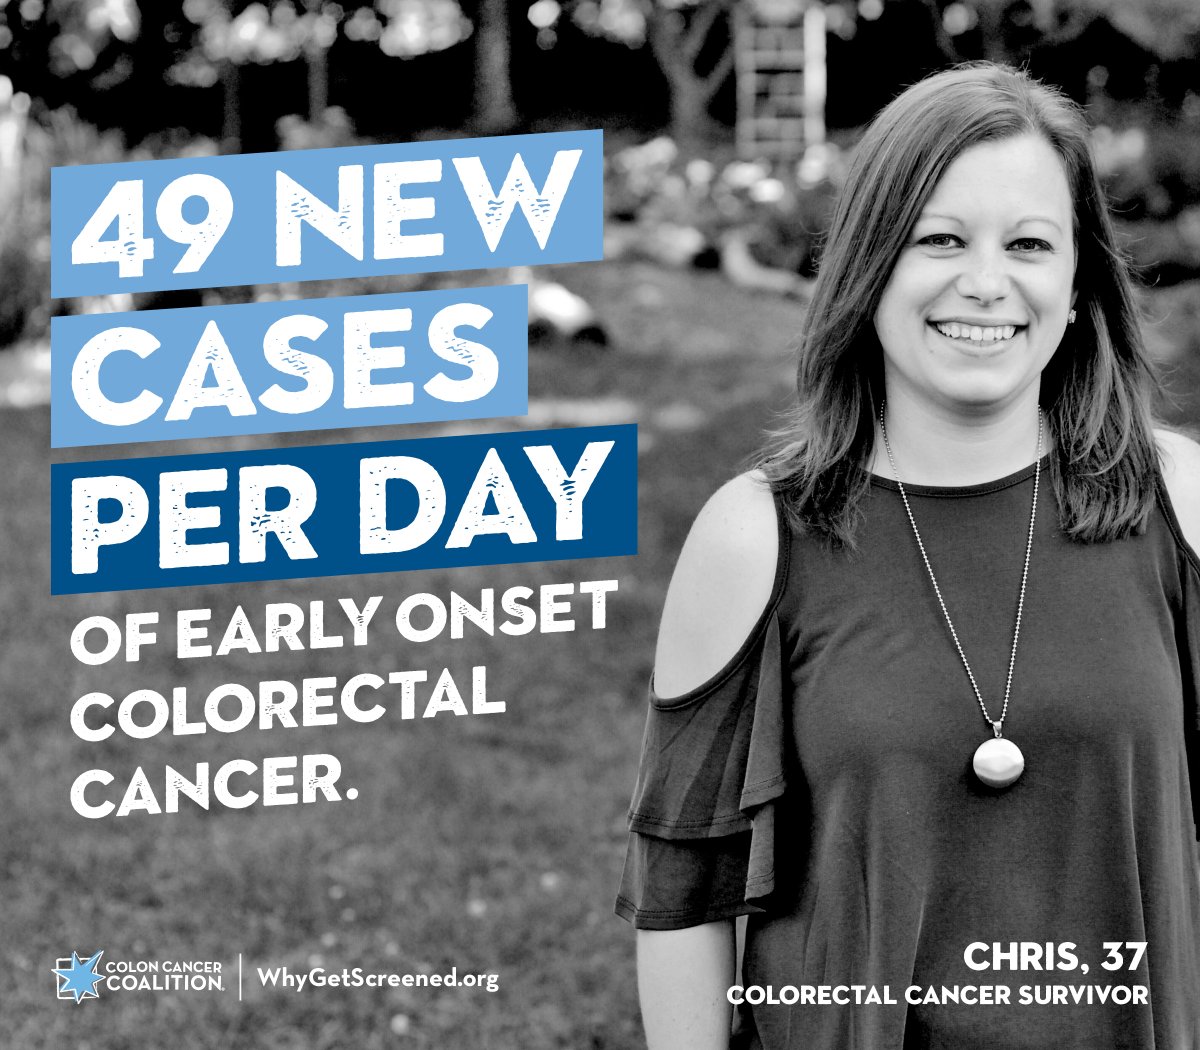 'In 2020, there will be about 18,000 cases of colorectal cancer diagnosed in people under 50, the equivalent of 49 new cases per day.' We are all collectively working to raise awareness in young adults. Join the movement to raise awareness. pressroom.cancer.org/CRCStats2020